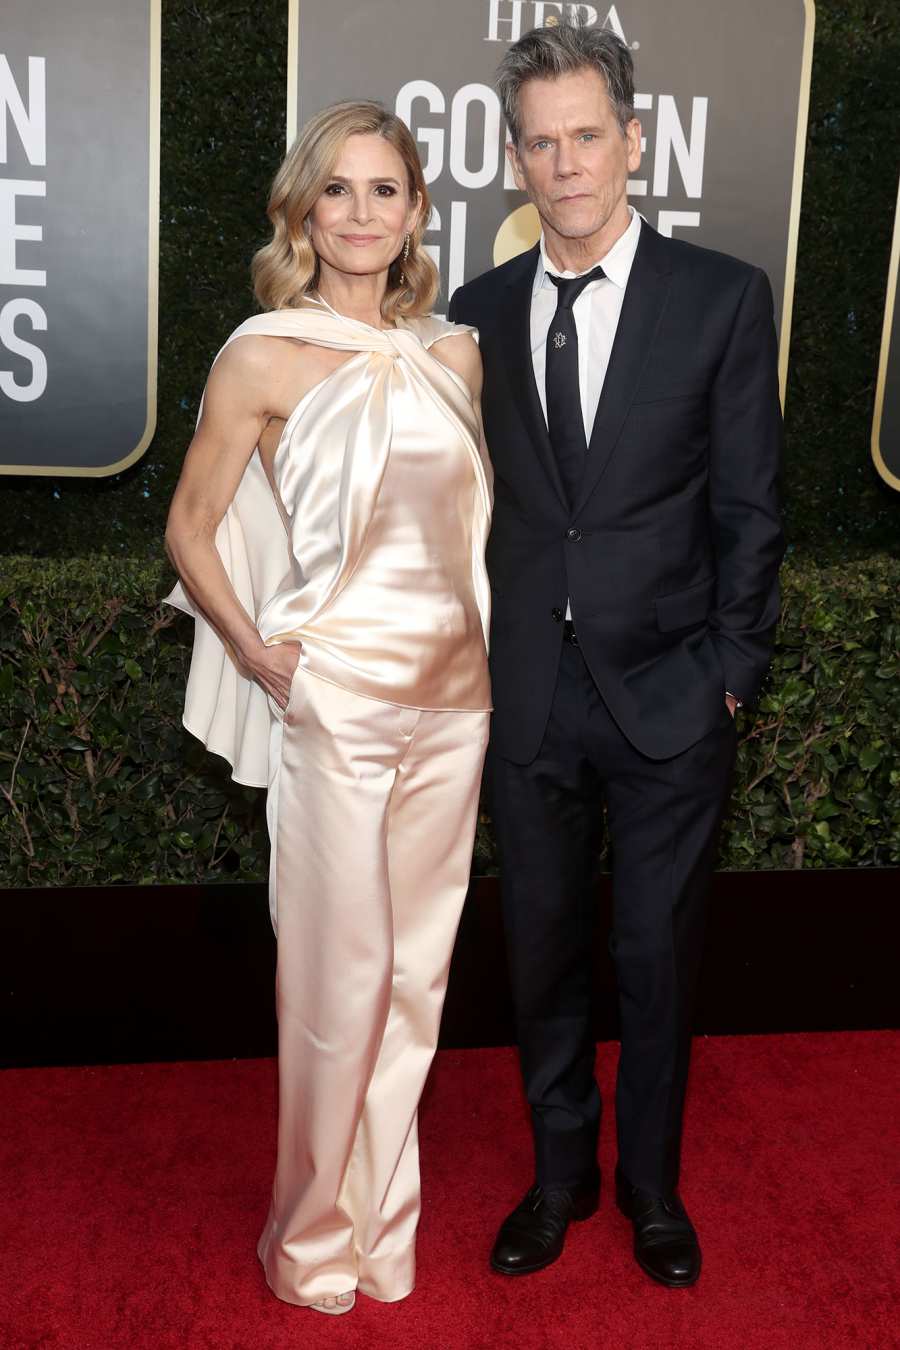 Kevin Bacon and Kyra Sedgwick Cutest Couples at the 2021 Golden Globes